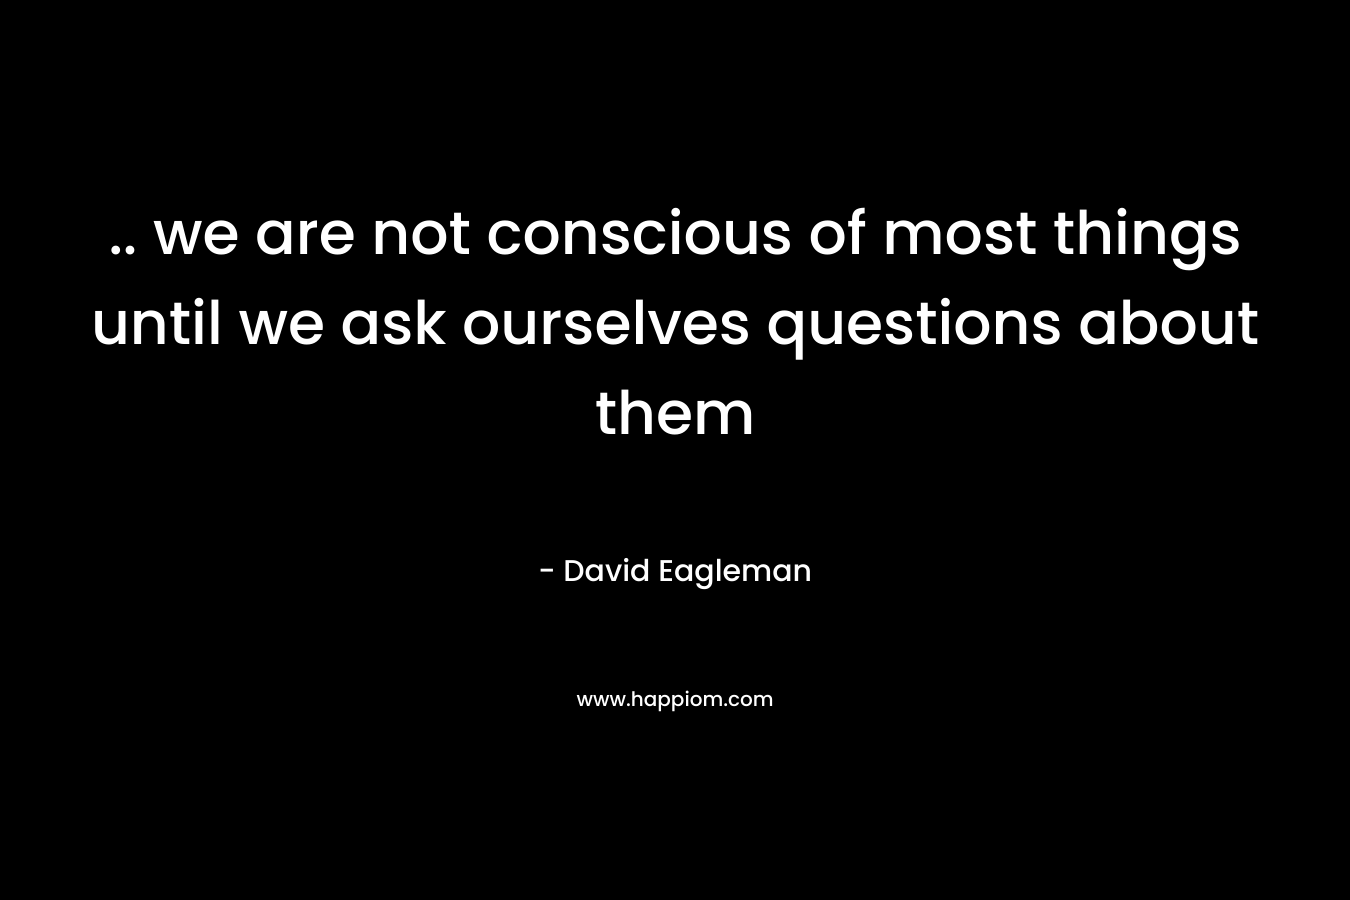 .. we are not conscious of most things until we ask ourselves questions about them